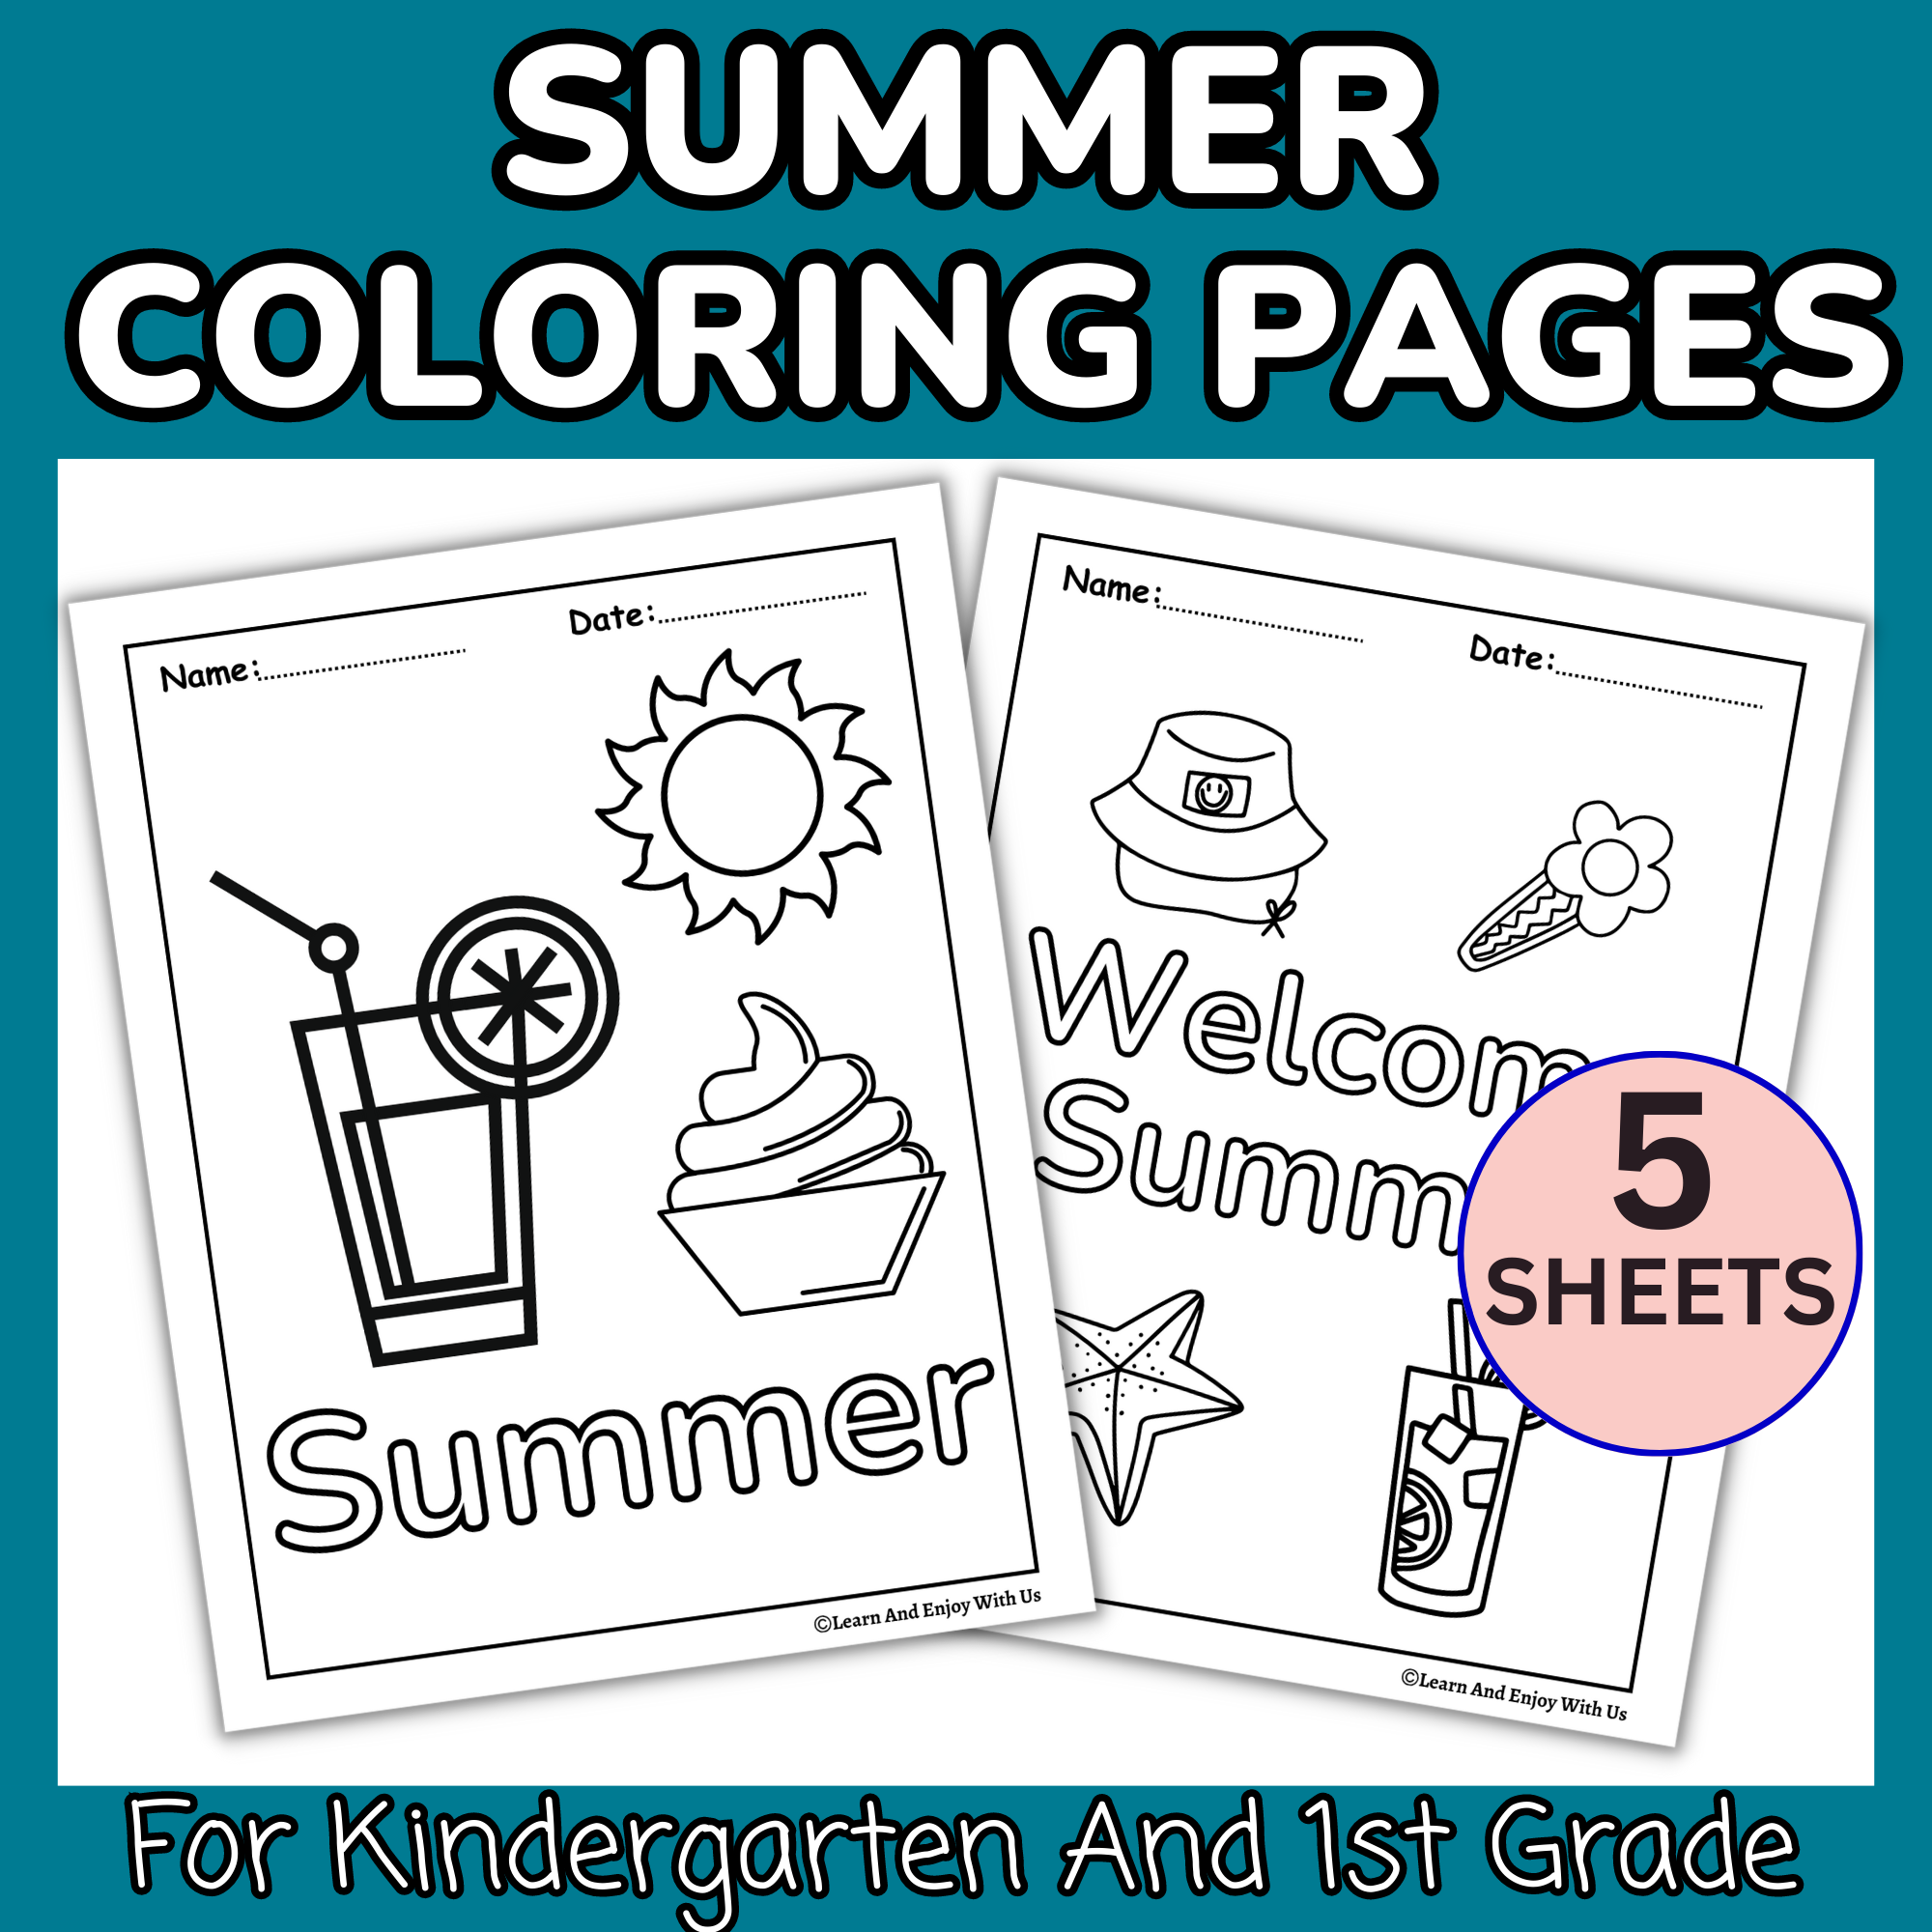 Summer coloring pages for kindergarten and st grade summer activities made by teachers